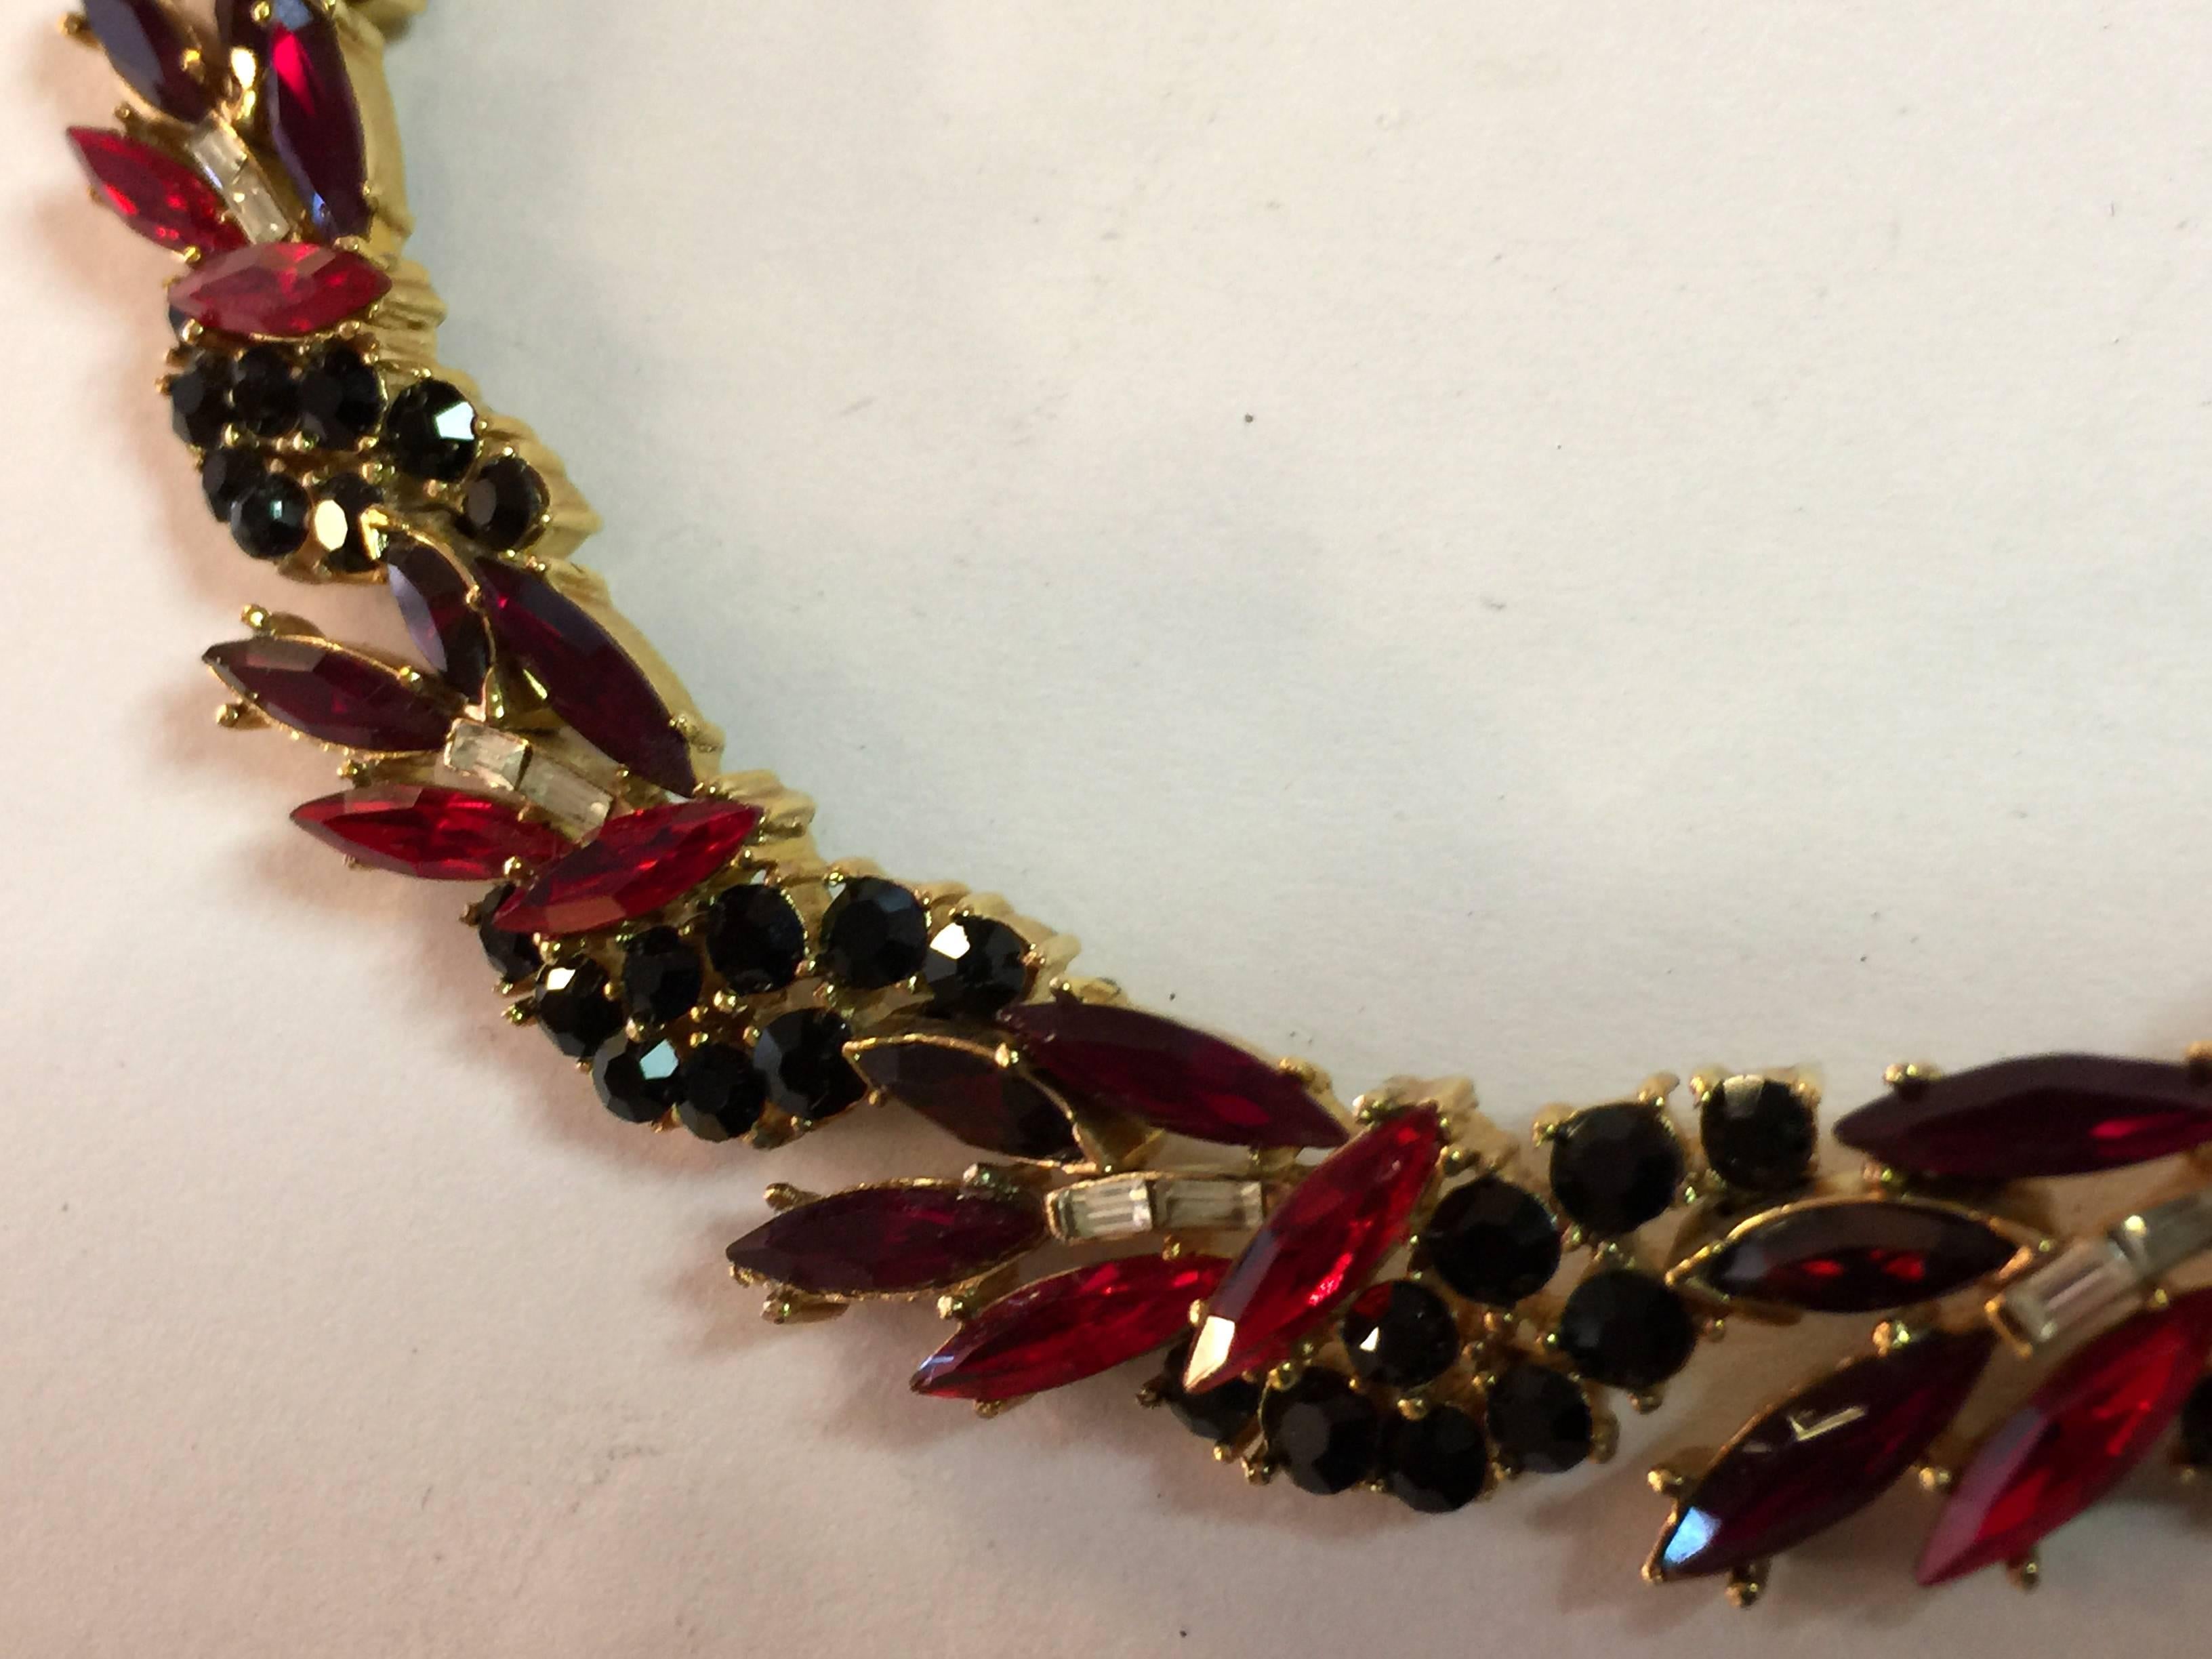 This lovely 1950s Trifari navette stone red and black circlet necklace us classic 1950s style TRIFARI. Delicate stonework in bold colo combination is uncommon, and makes a strong if delicate statement. The coordinate earrings are also available  on